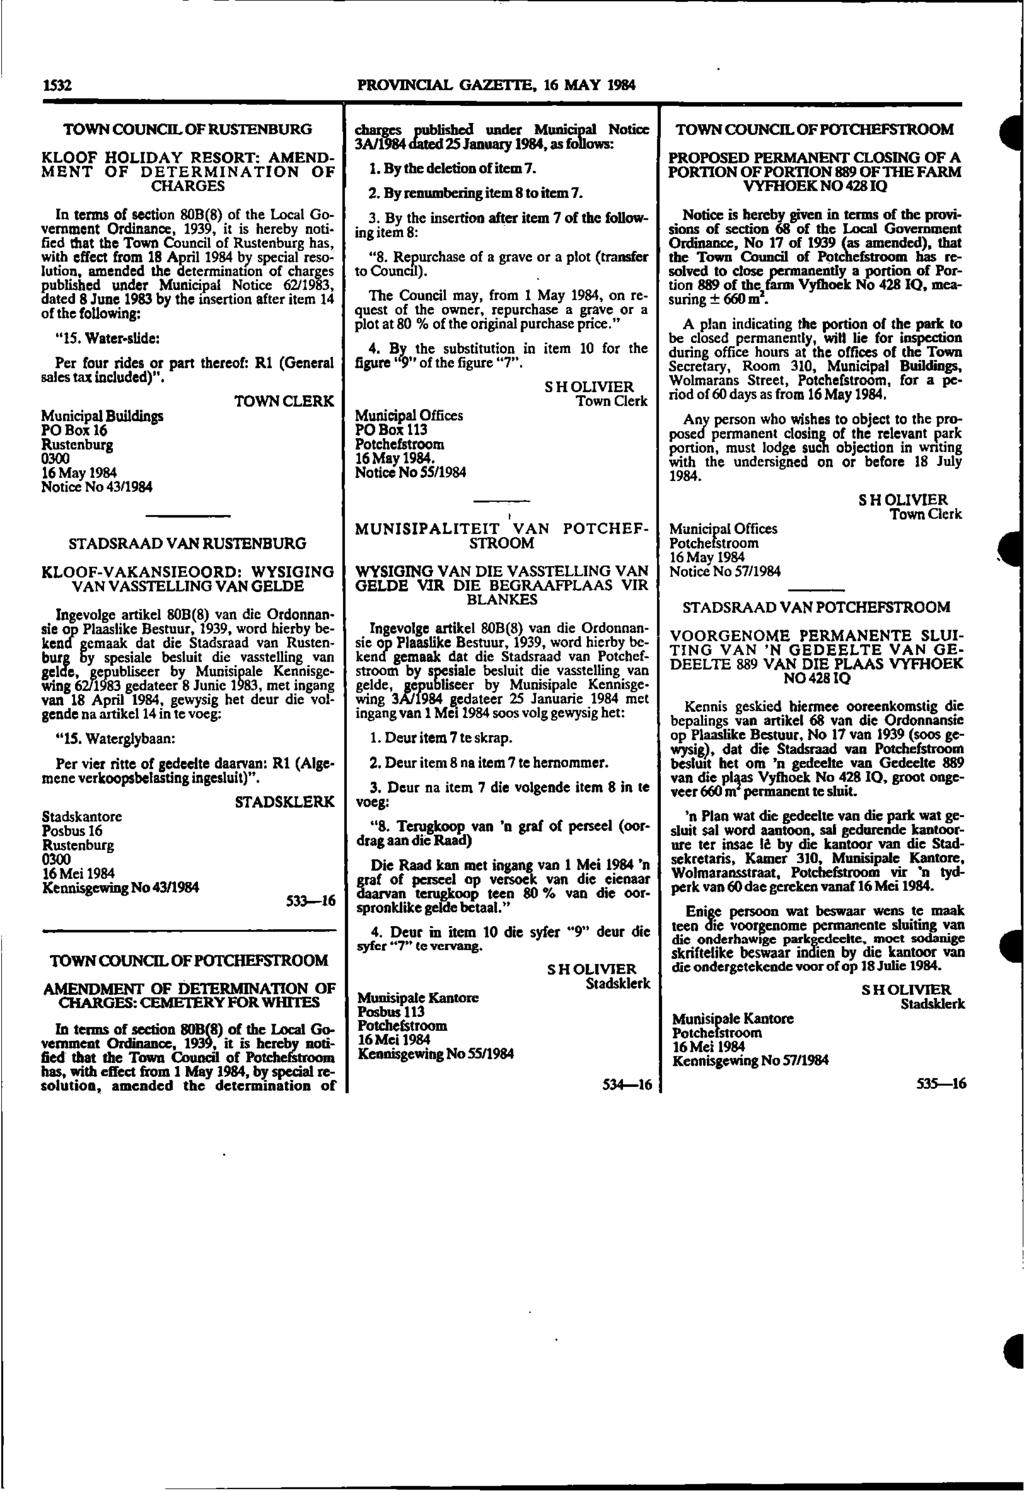 1532 PROVINCIAL GAZETTE, 16 MAY 1984 TOWN COUNCIL OF RUSTENBURG KLOOF HOLIDAY RESORT: AMEND M E N T O F D E T E R M IN A T IO N O F CHARGES In terms of section 80B(8) of the Local Government